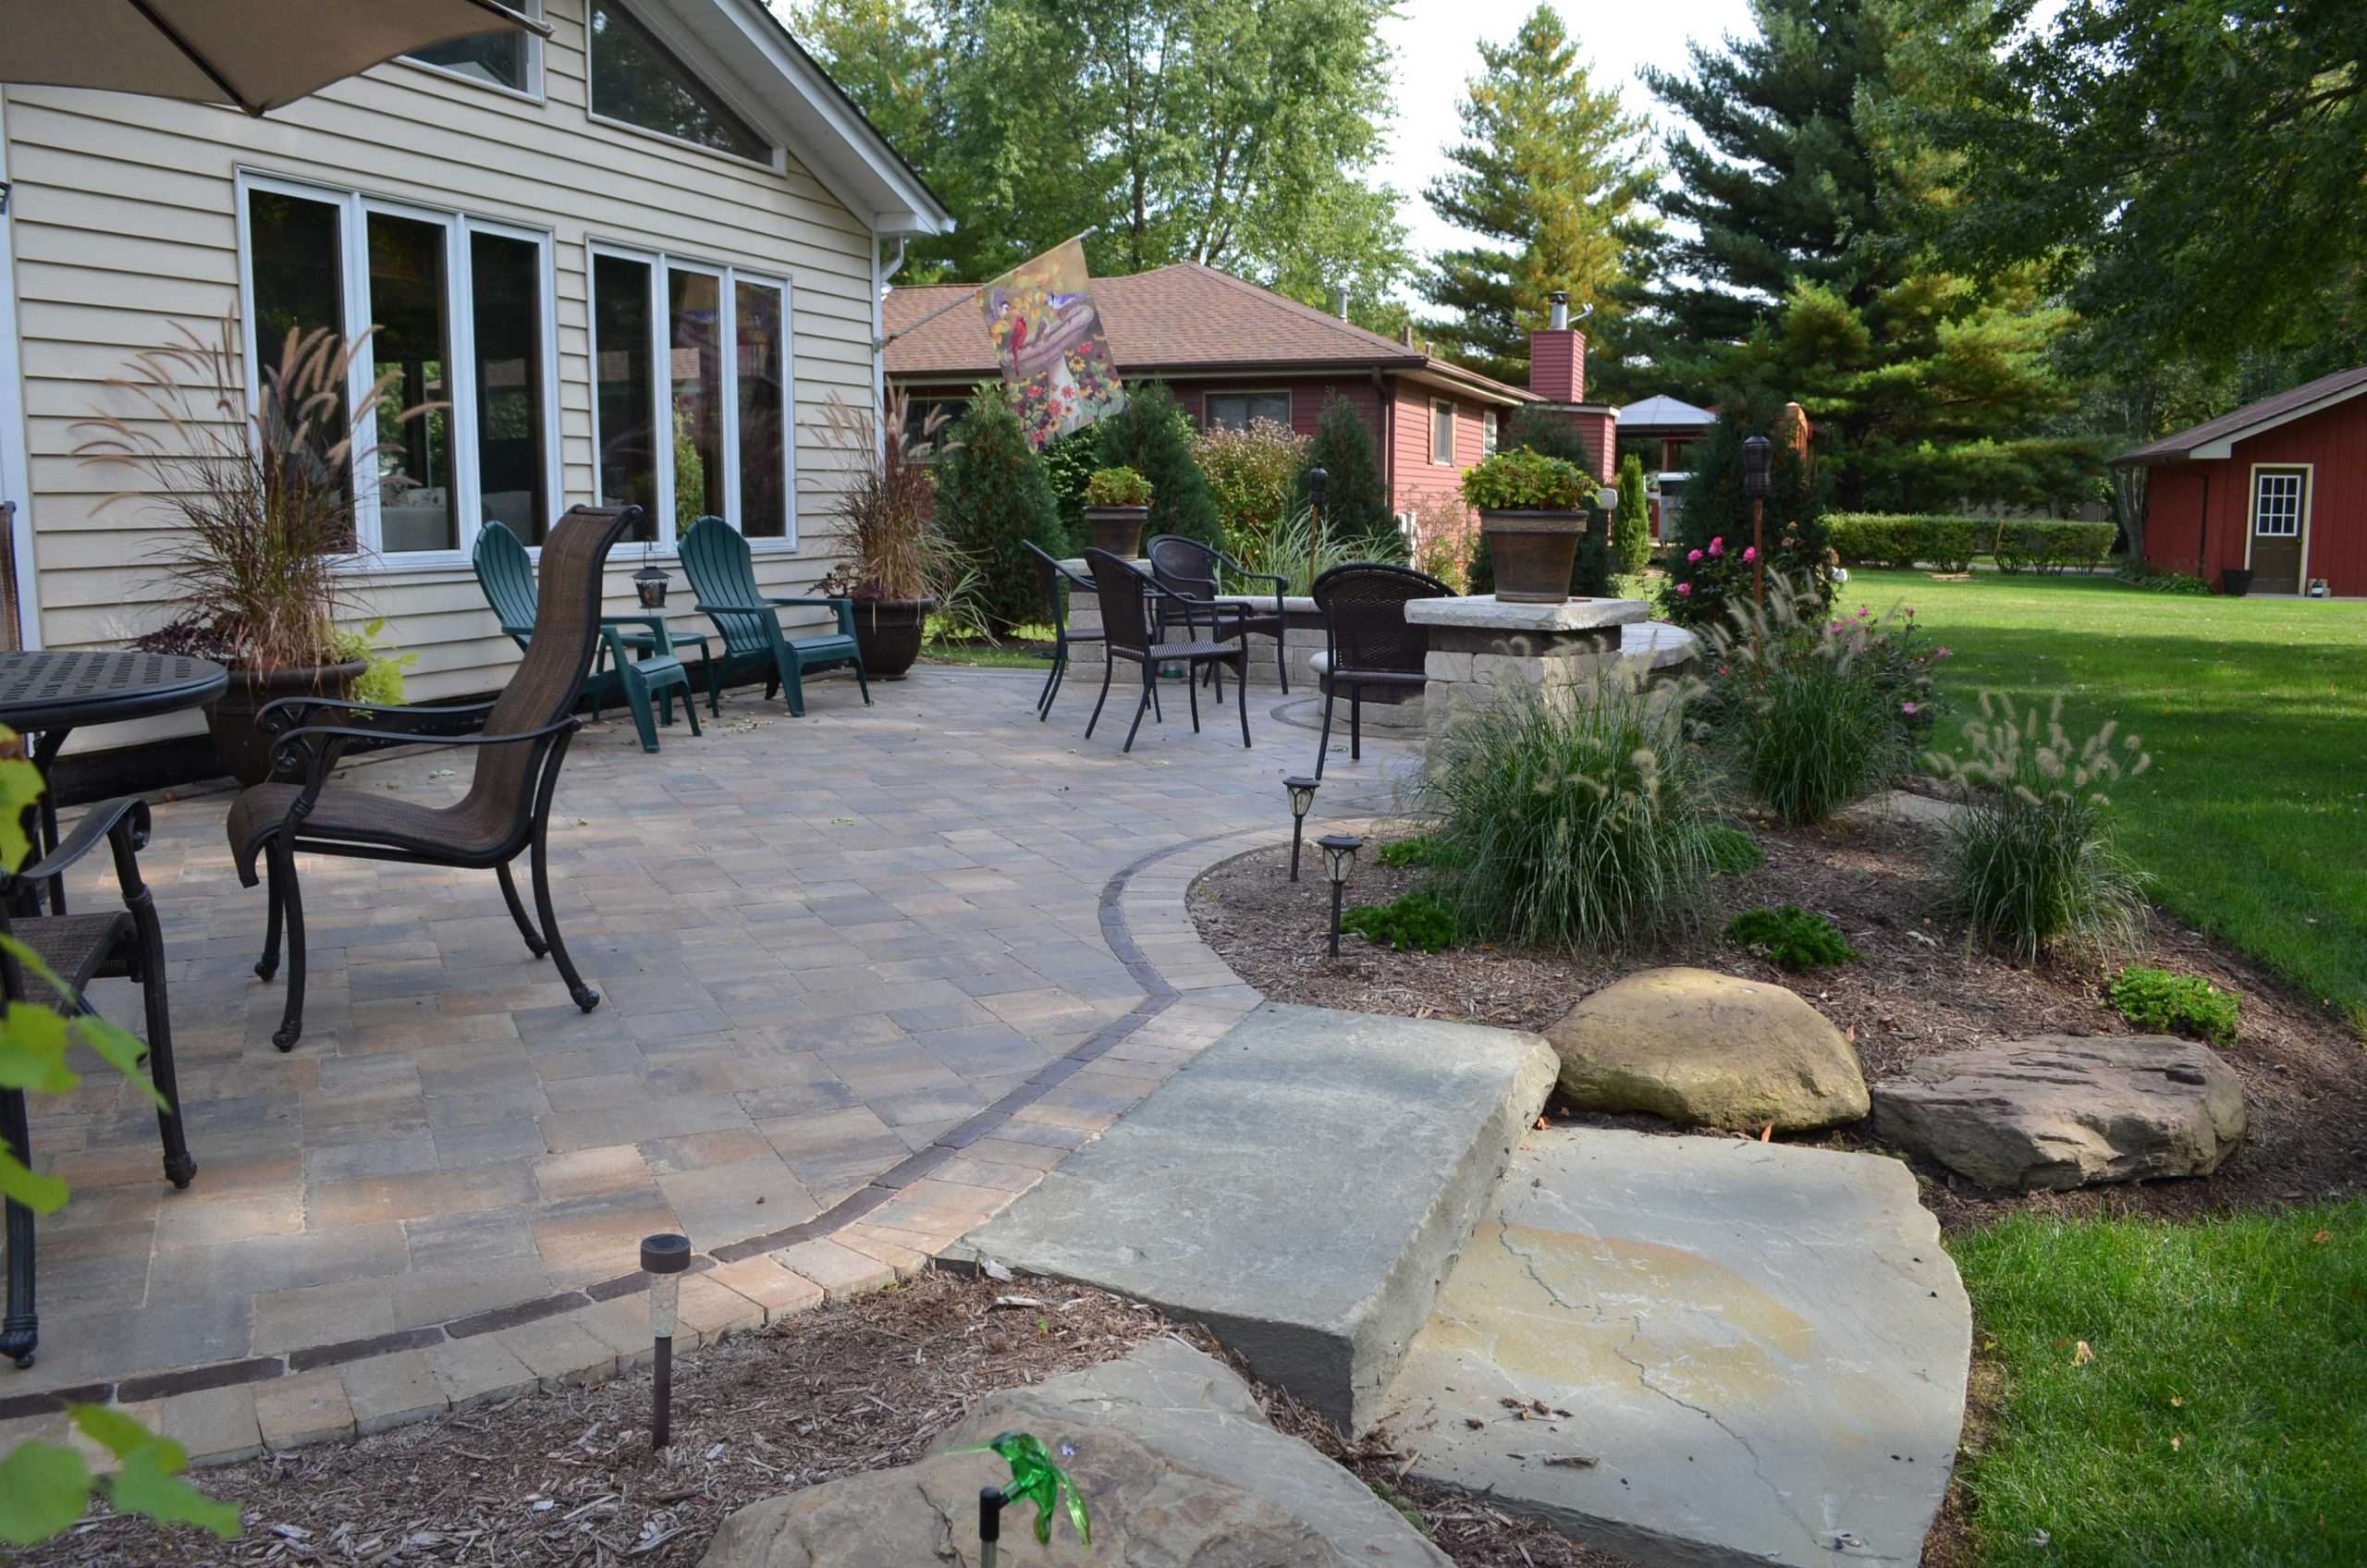 4 Reasons to Replace Wood Deck with Paver Patio